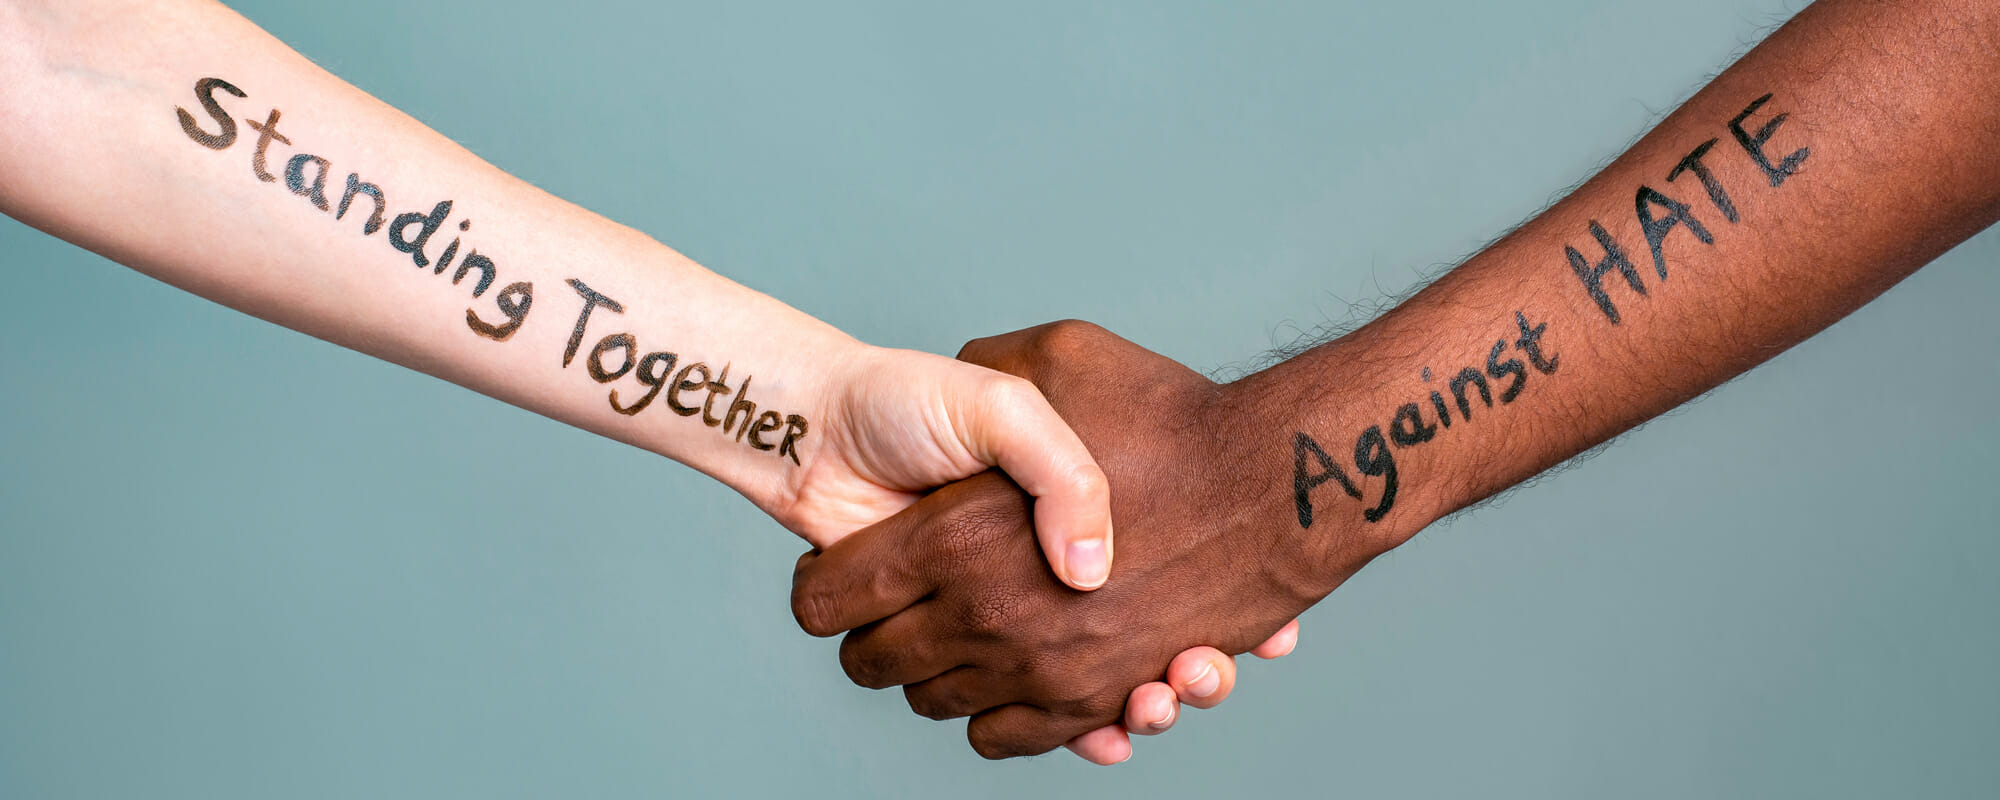 Handshake between black and white people standing together against hate